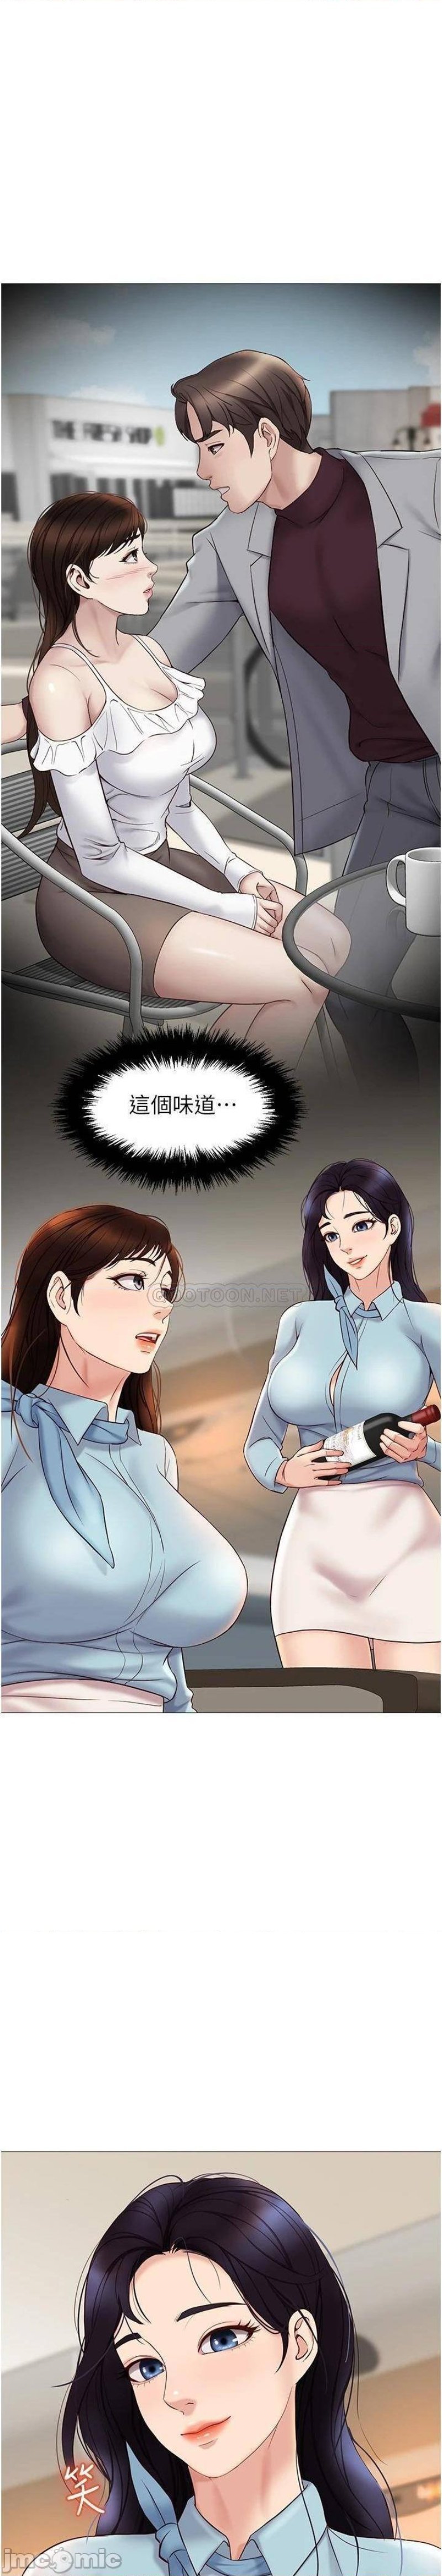 daughter-friend-raw-chap-28-29